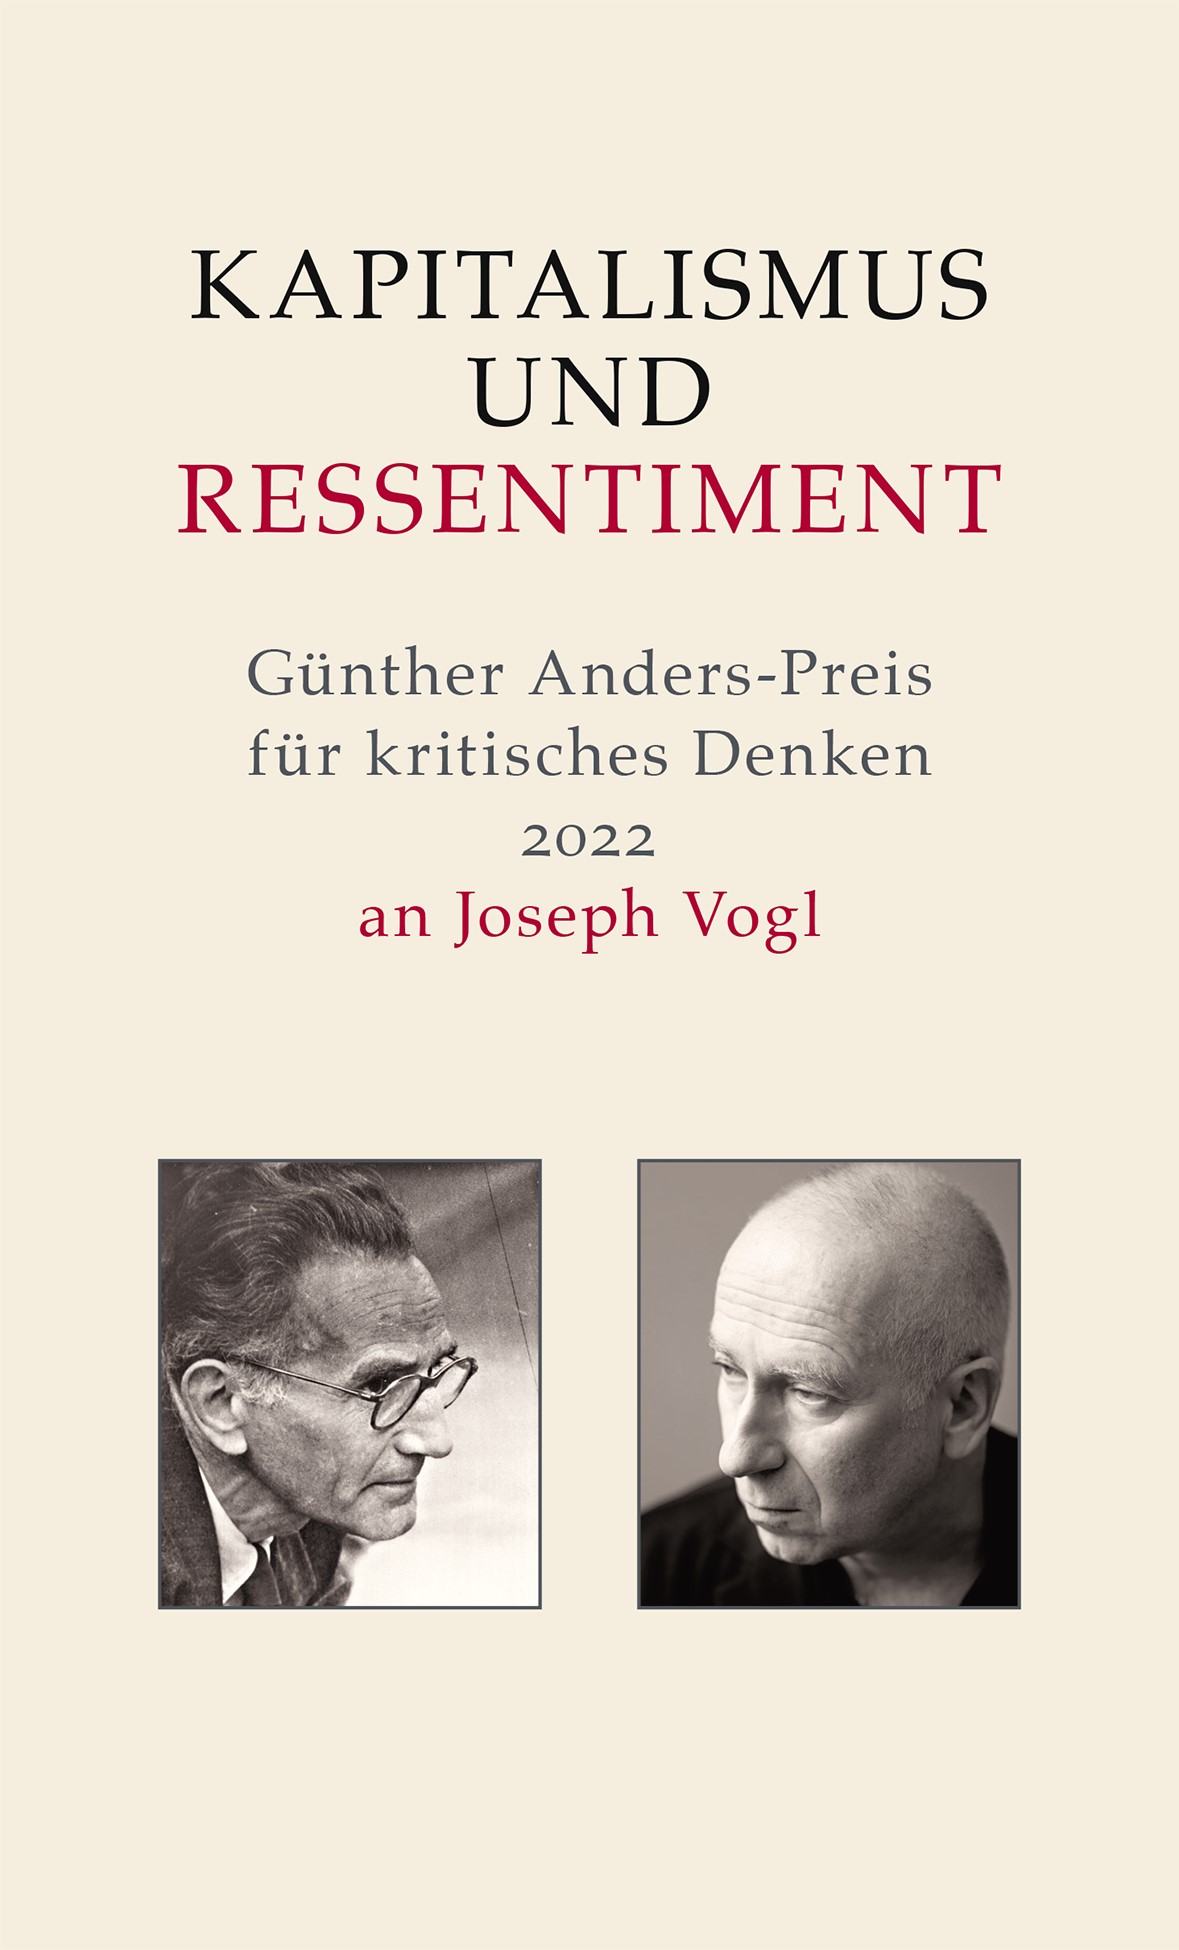 Cover: Dries, Christian / Beck, Wolfgang, Kapitalismus und Ressentiment